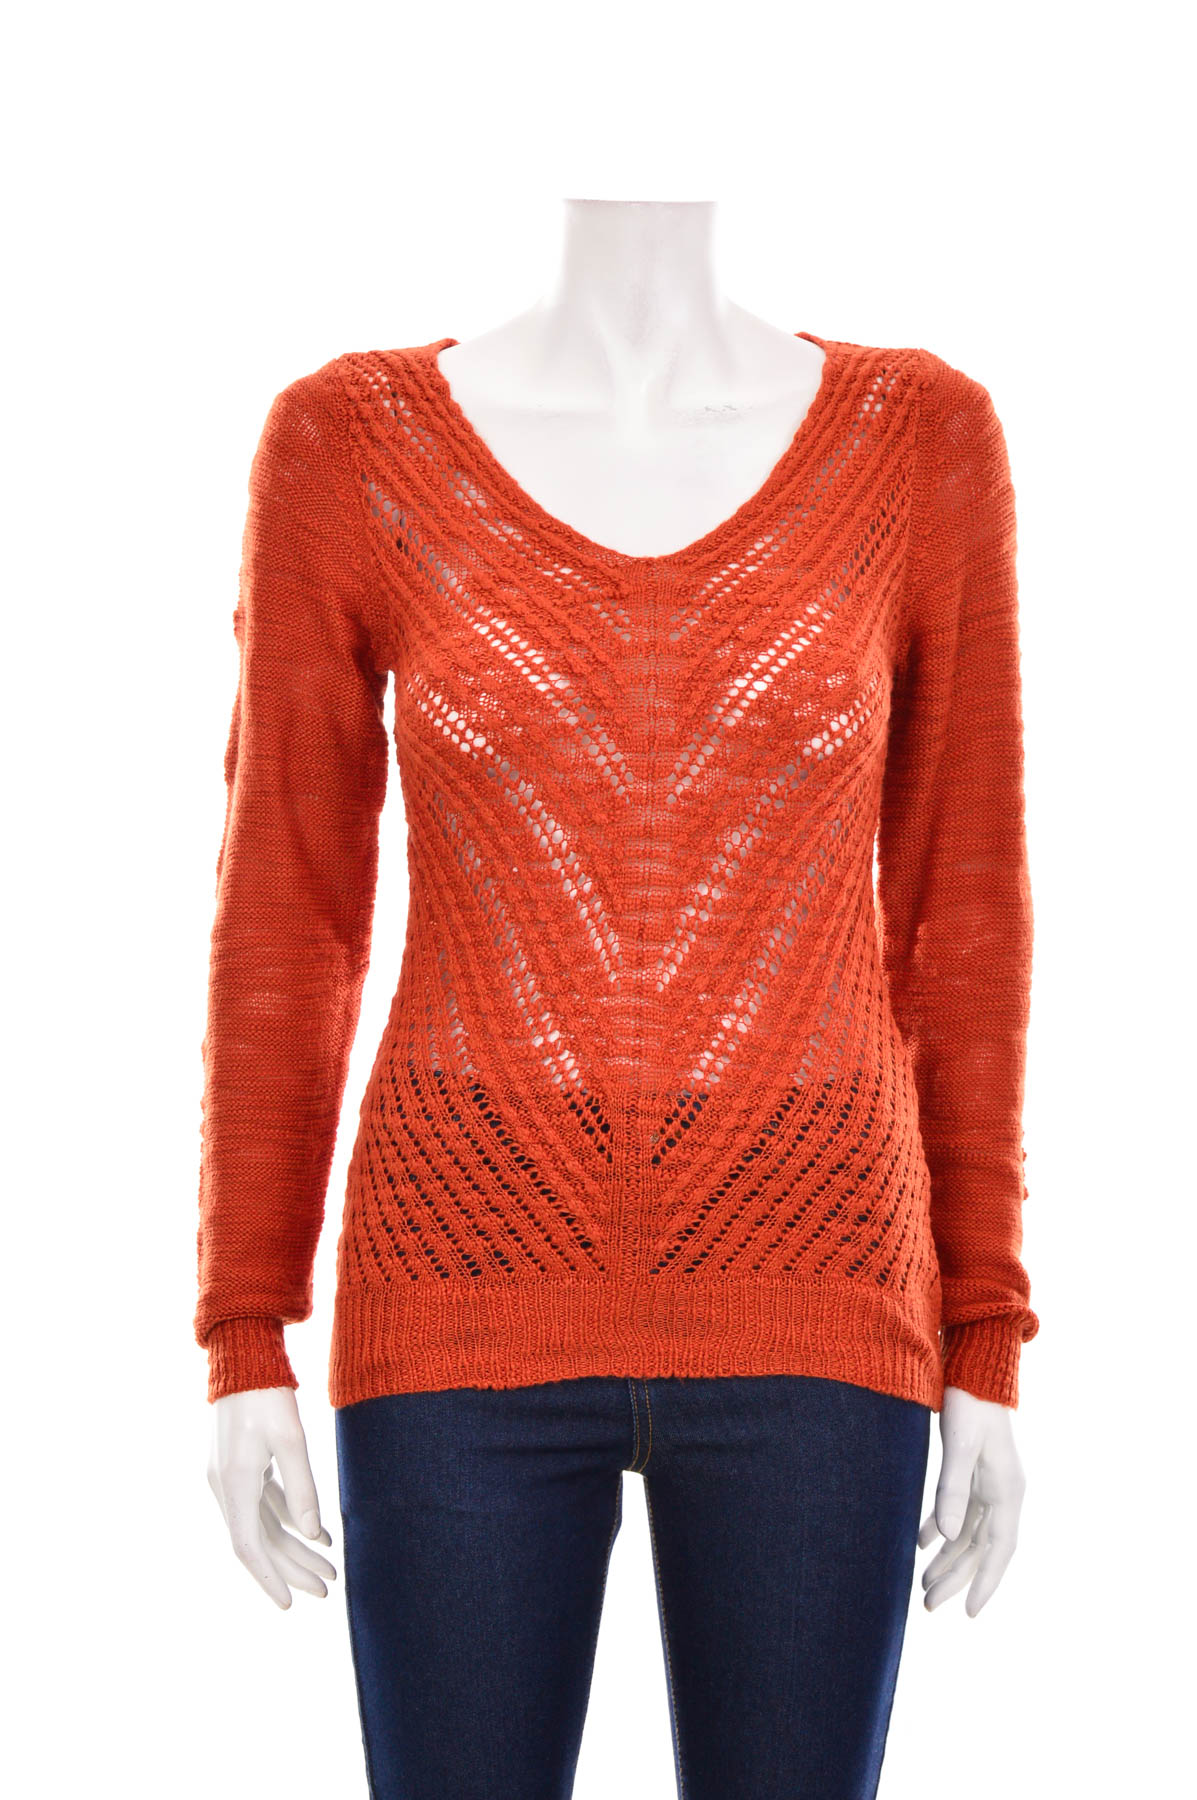 Women's sweater - Attention - 0